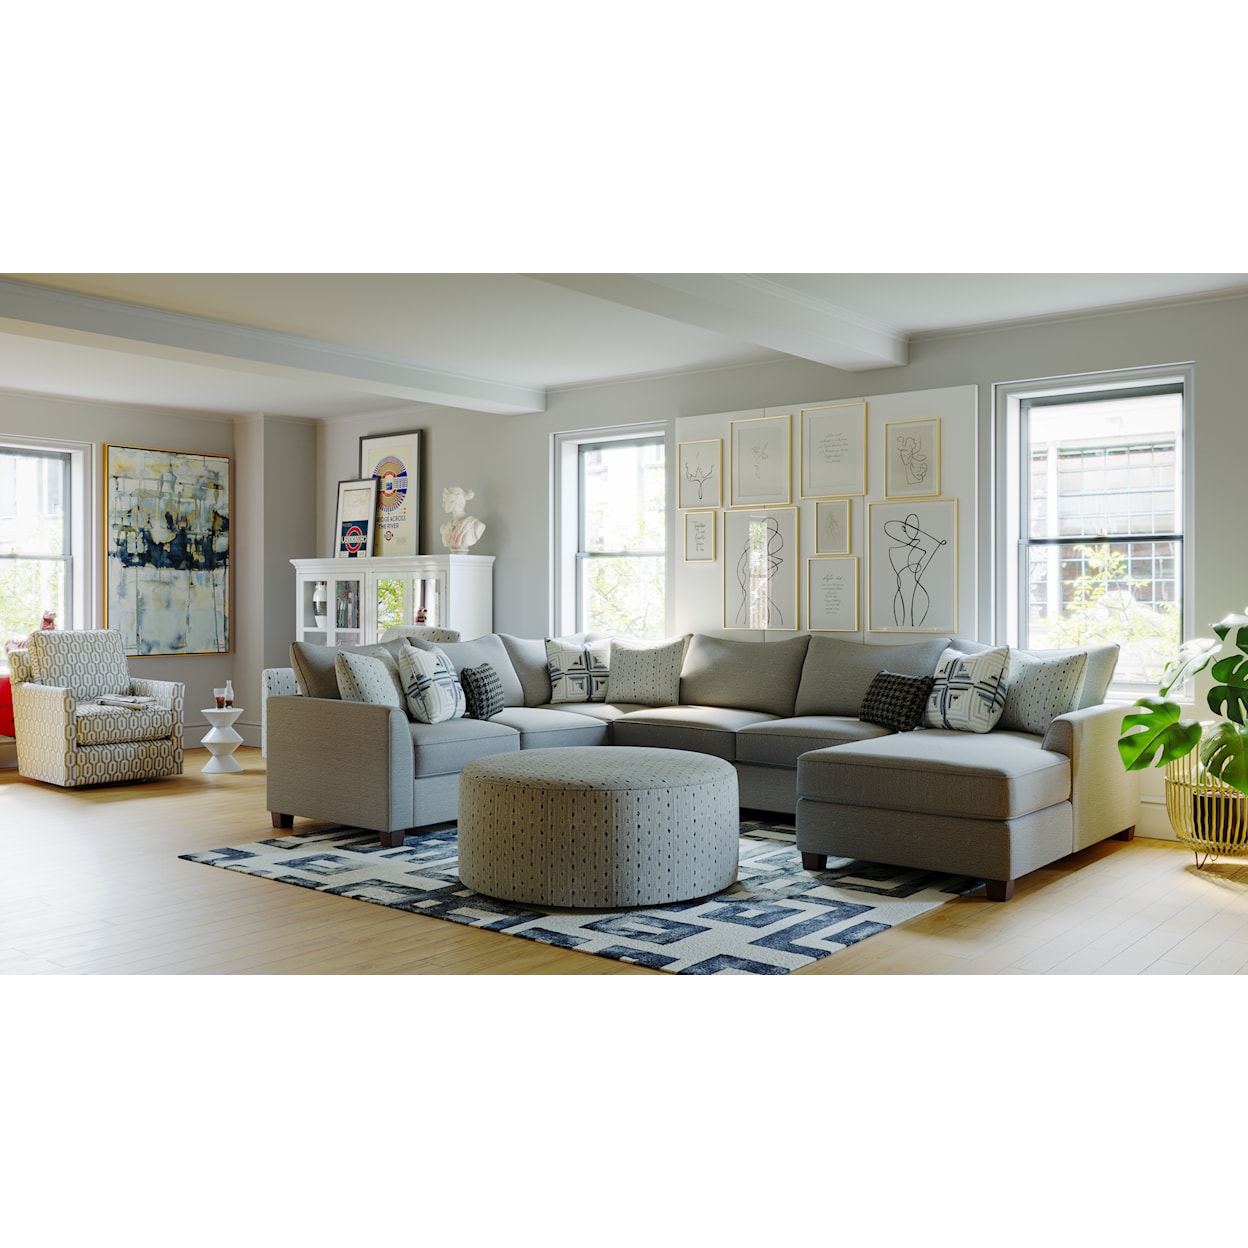 VFM Signature 28 PALM BEACH IRON 3-Piece Sectional with Right Chaise